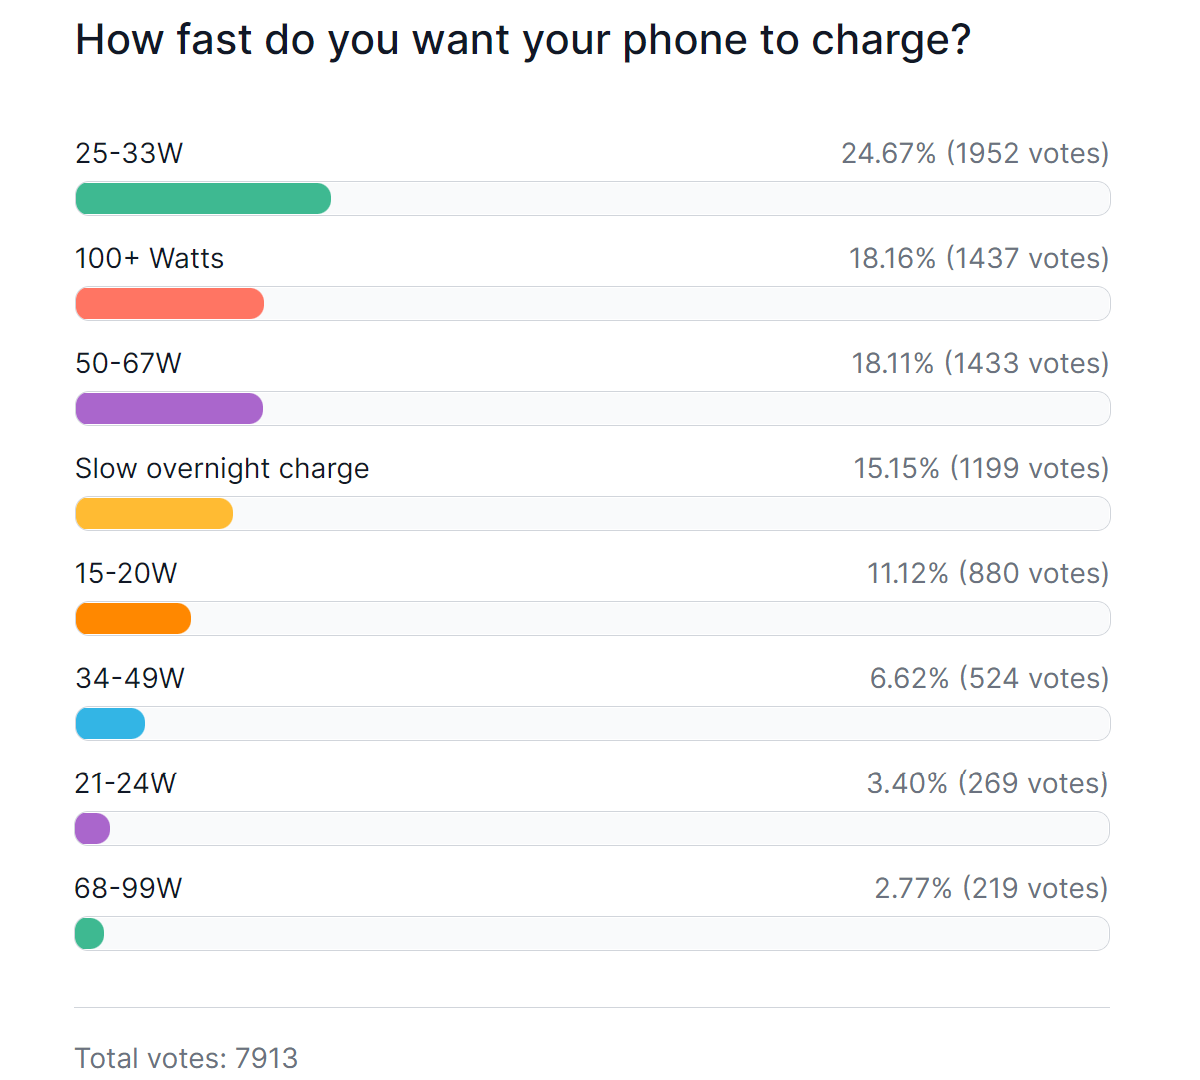 The charging study aftermath: Overnight charging is going out of fashion